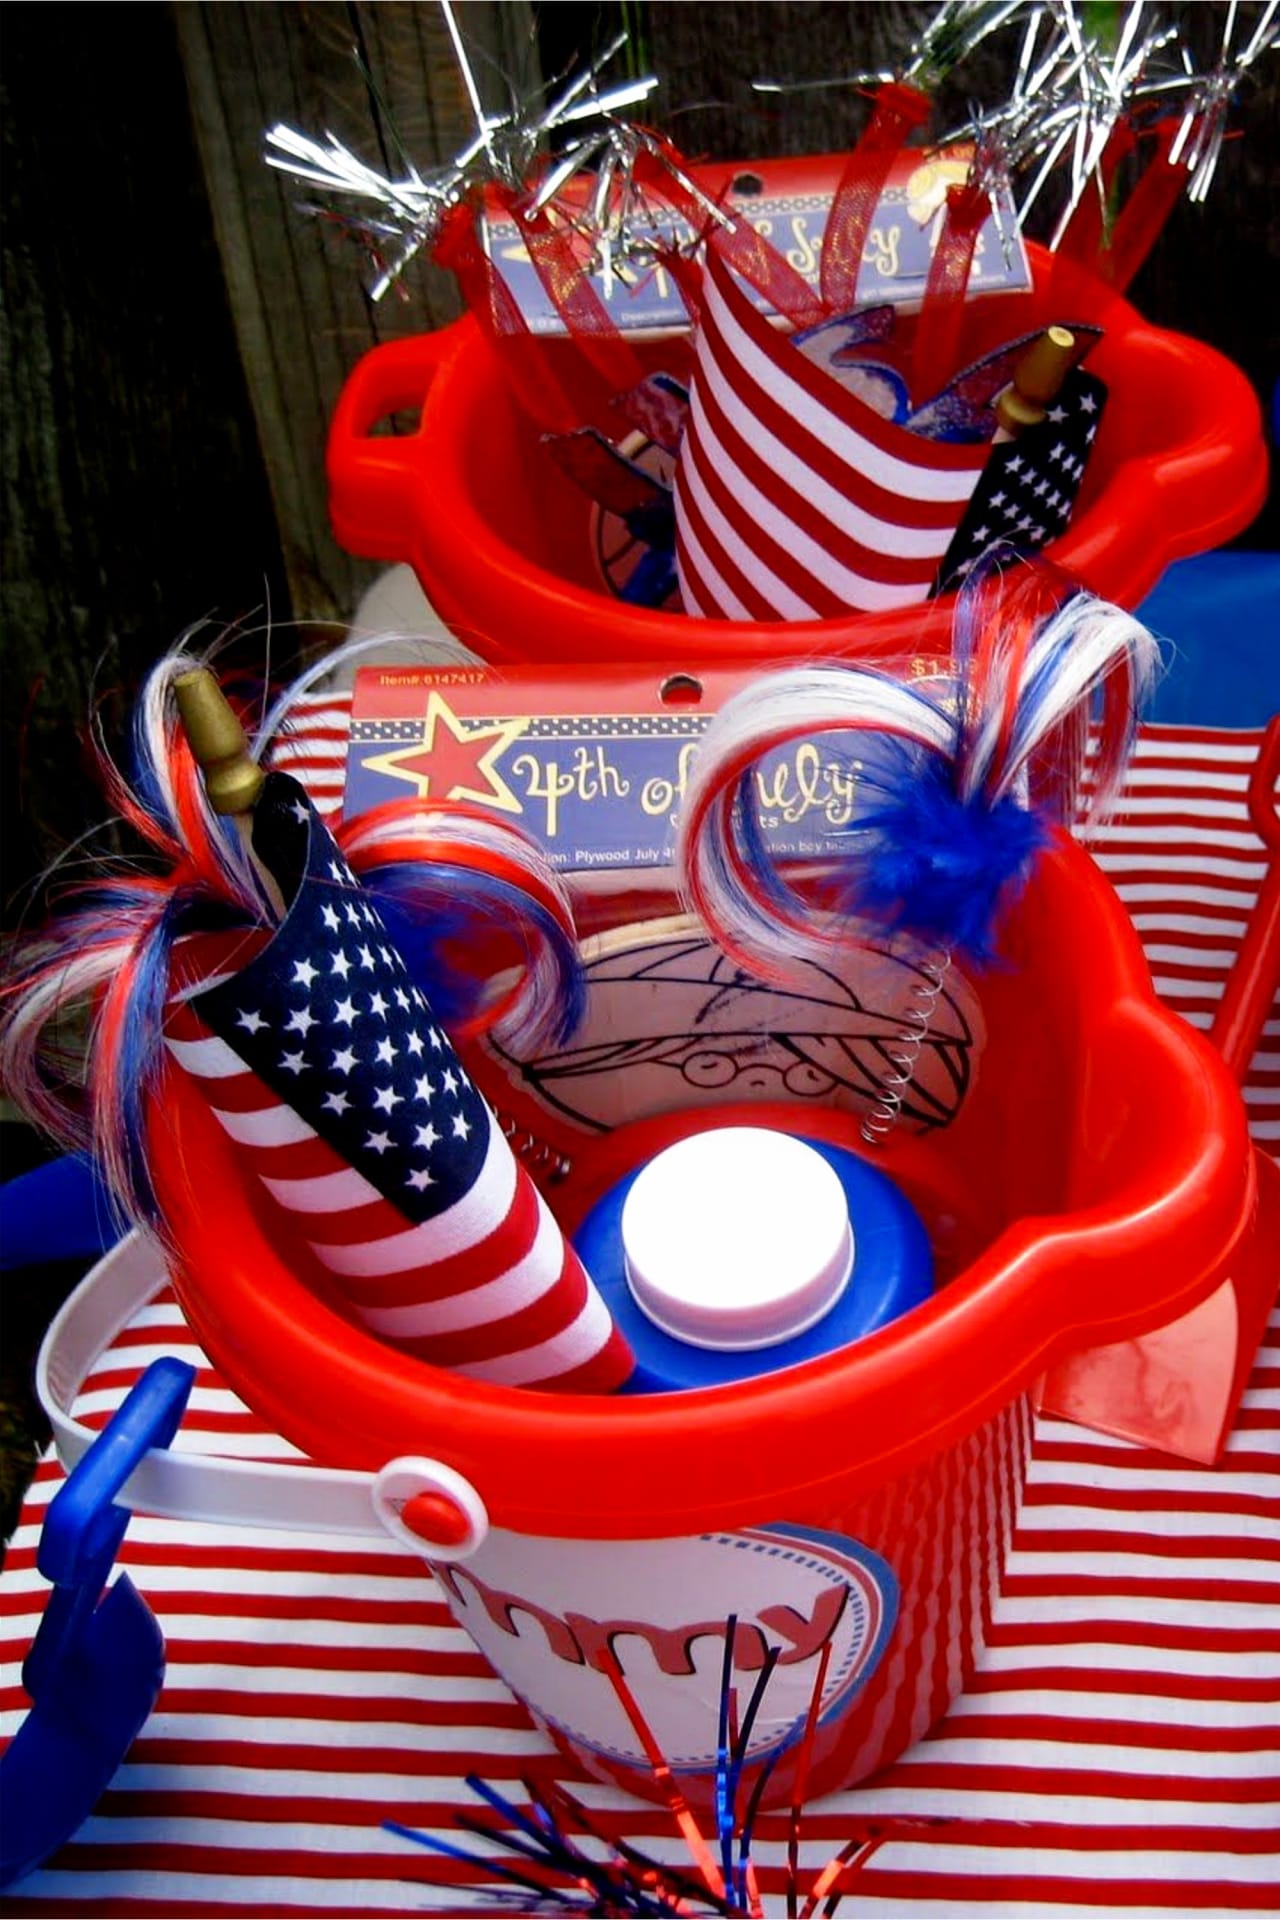 4th of July party ideas for kids - cute ideas for the kids at your July 4th party